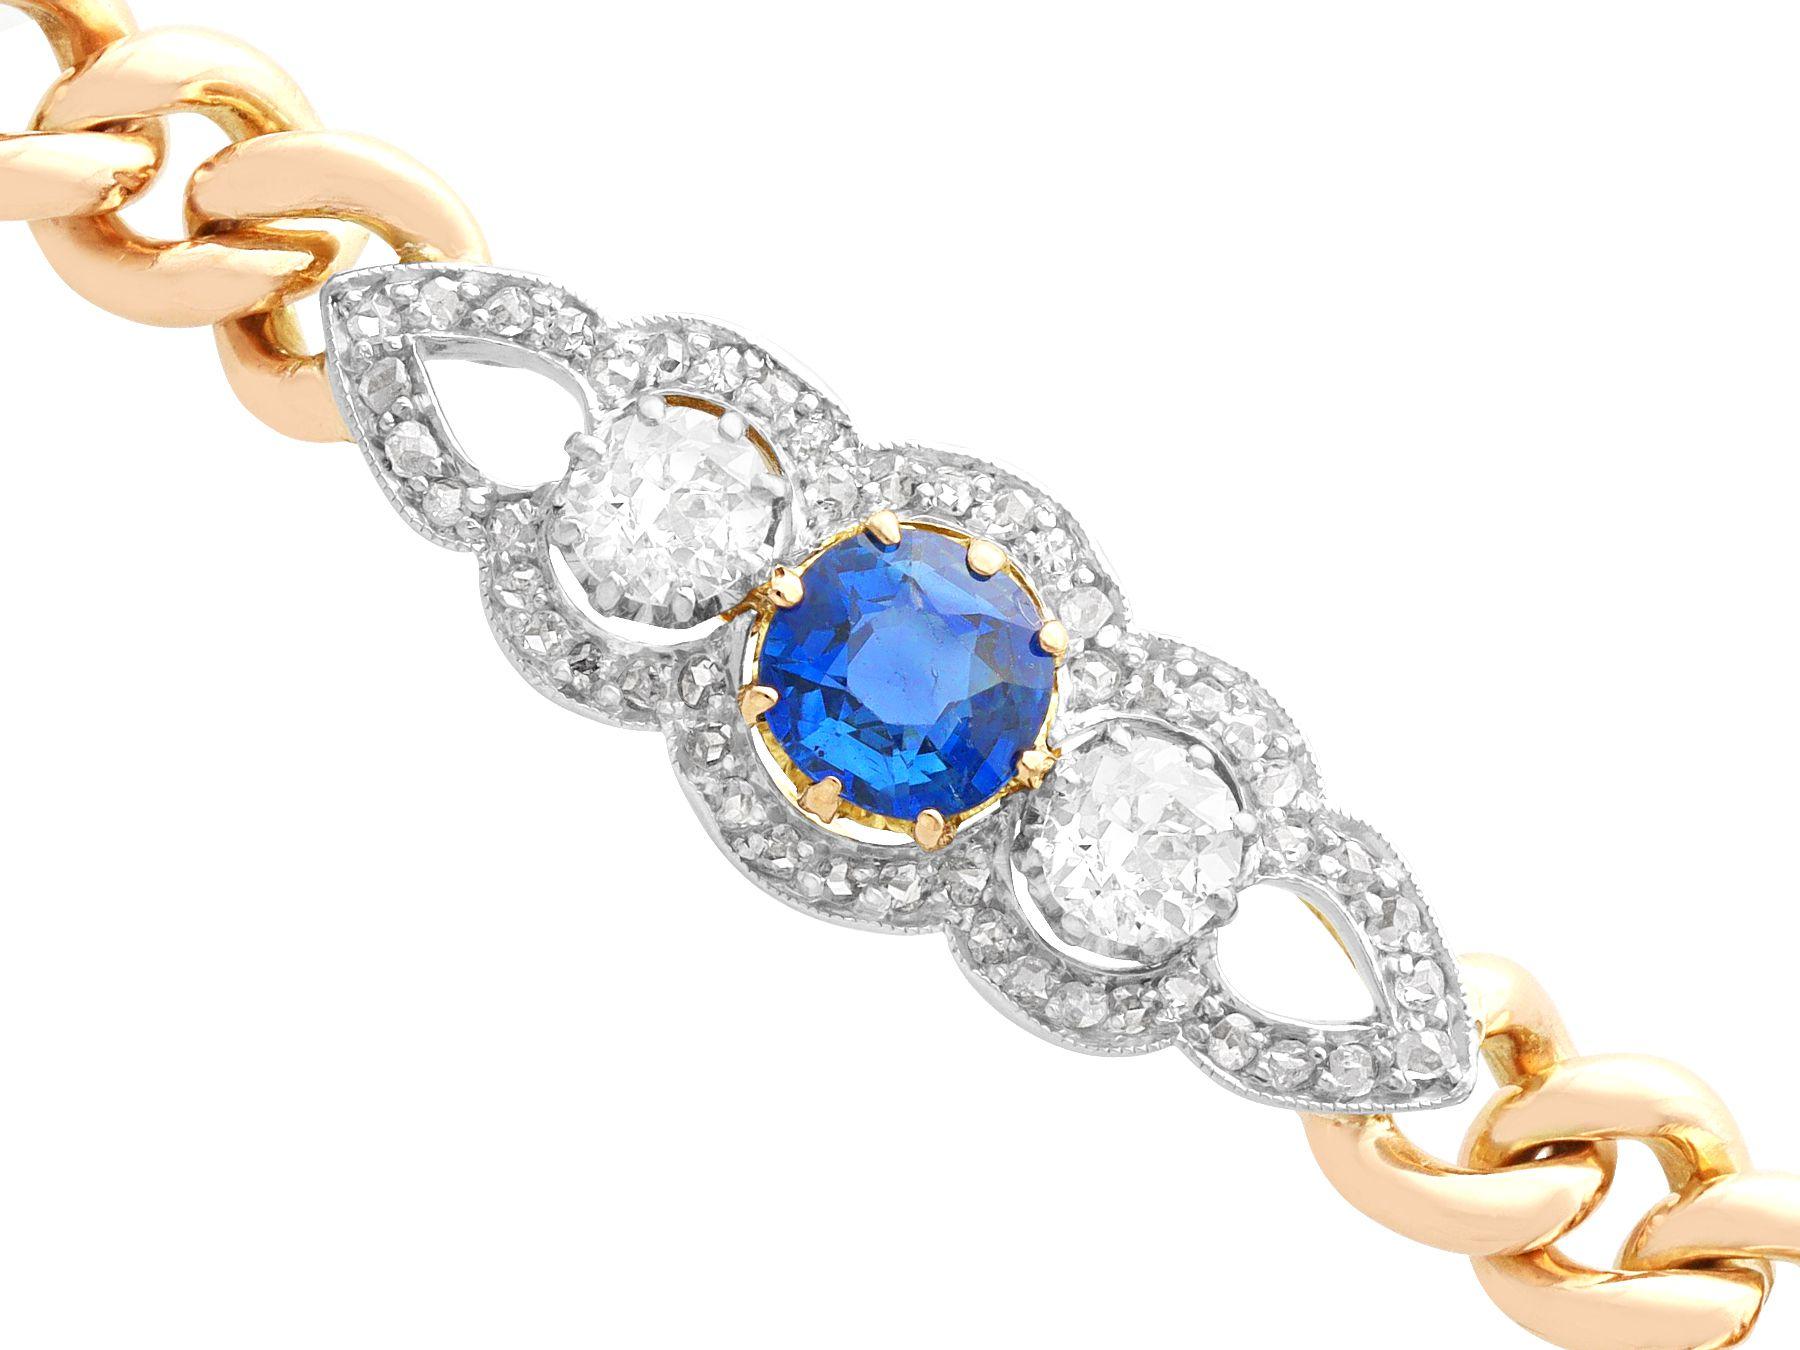 A stunning, fine and impressive antique 0.96 carat sapphire and 1.13 carat diamond, 12 carat yellow gold bracelet; part of our diverse antique jewellery and estate jewelry collections

This stunning, fine and impressive antique sapphire bracelet has